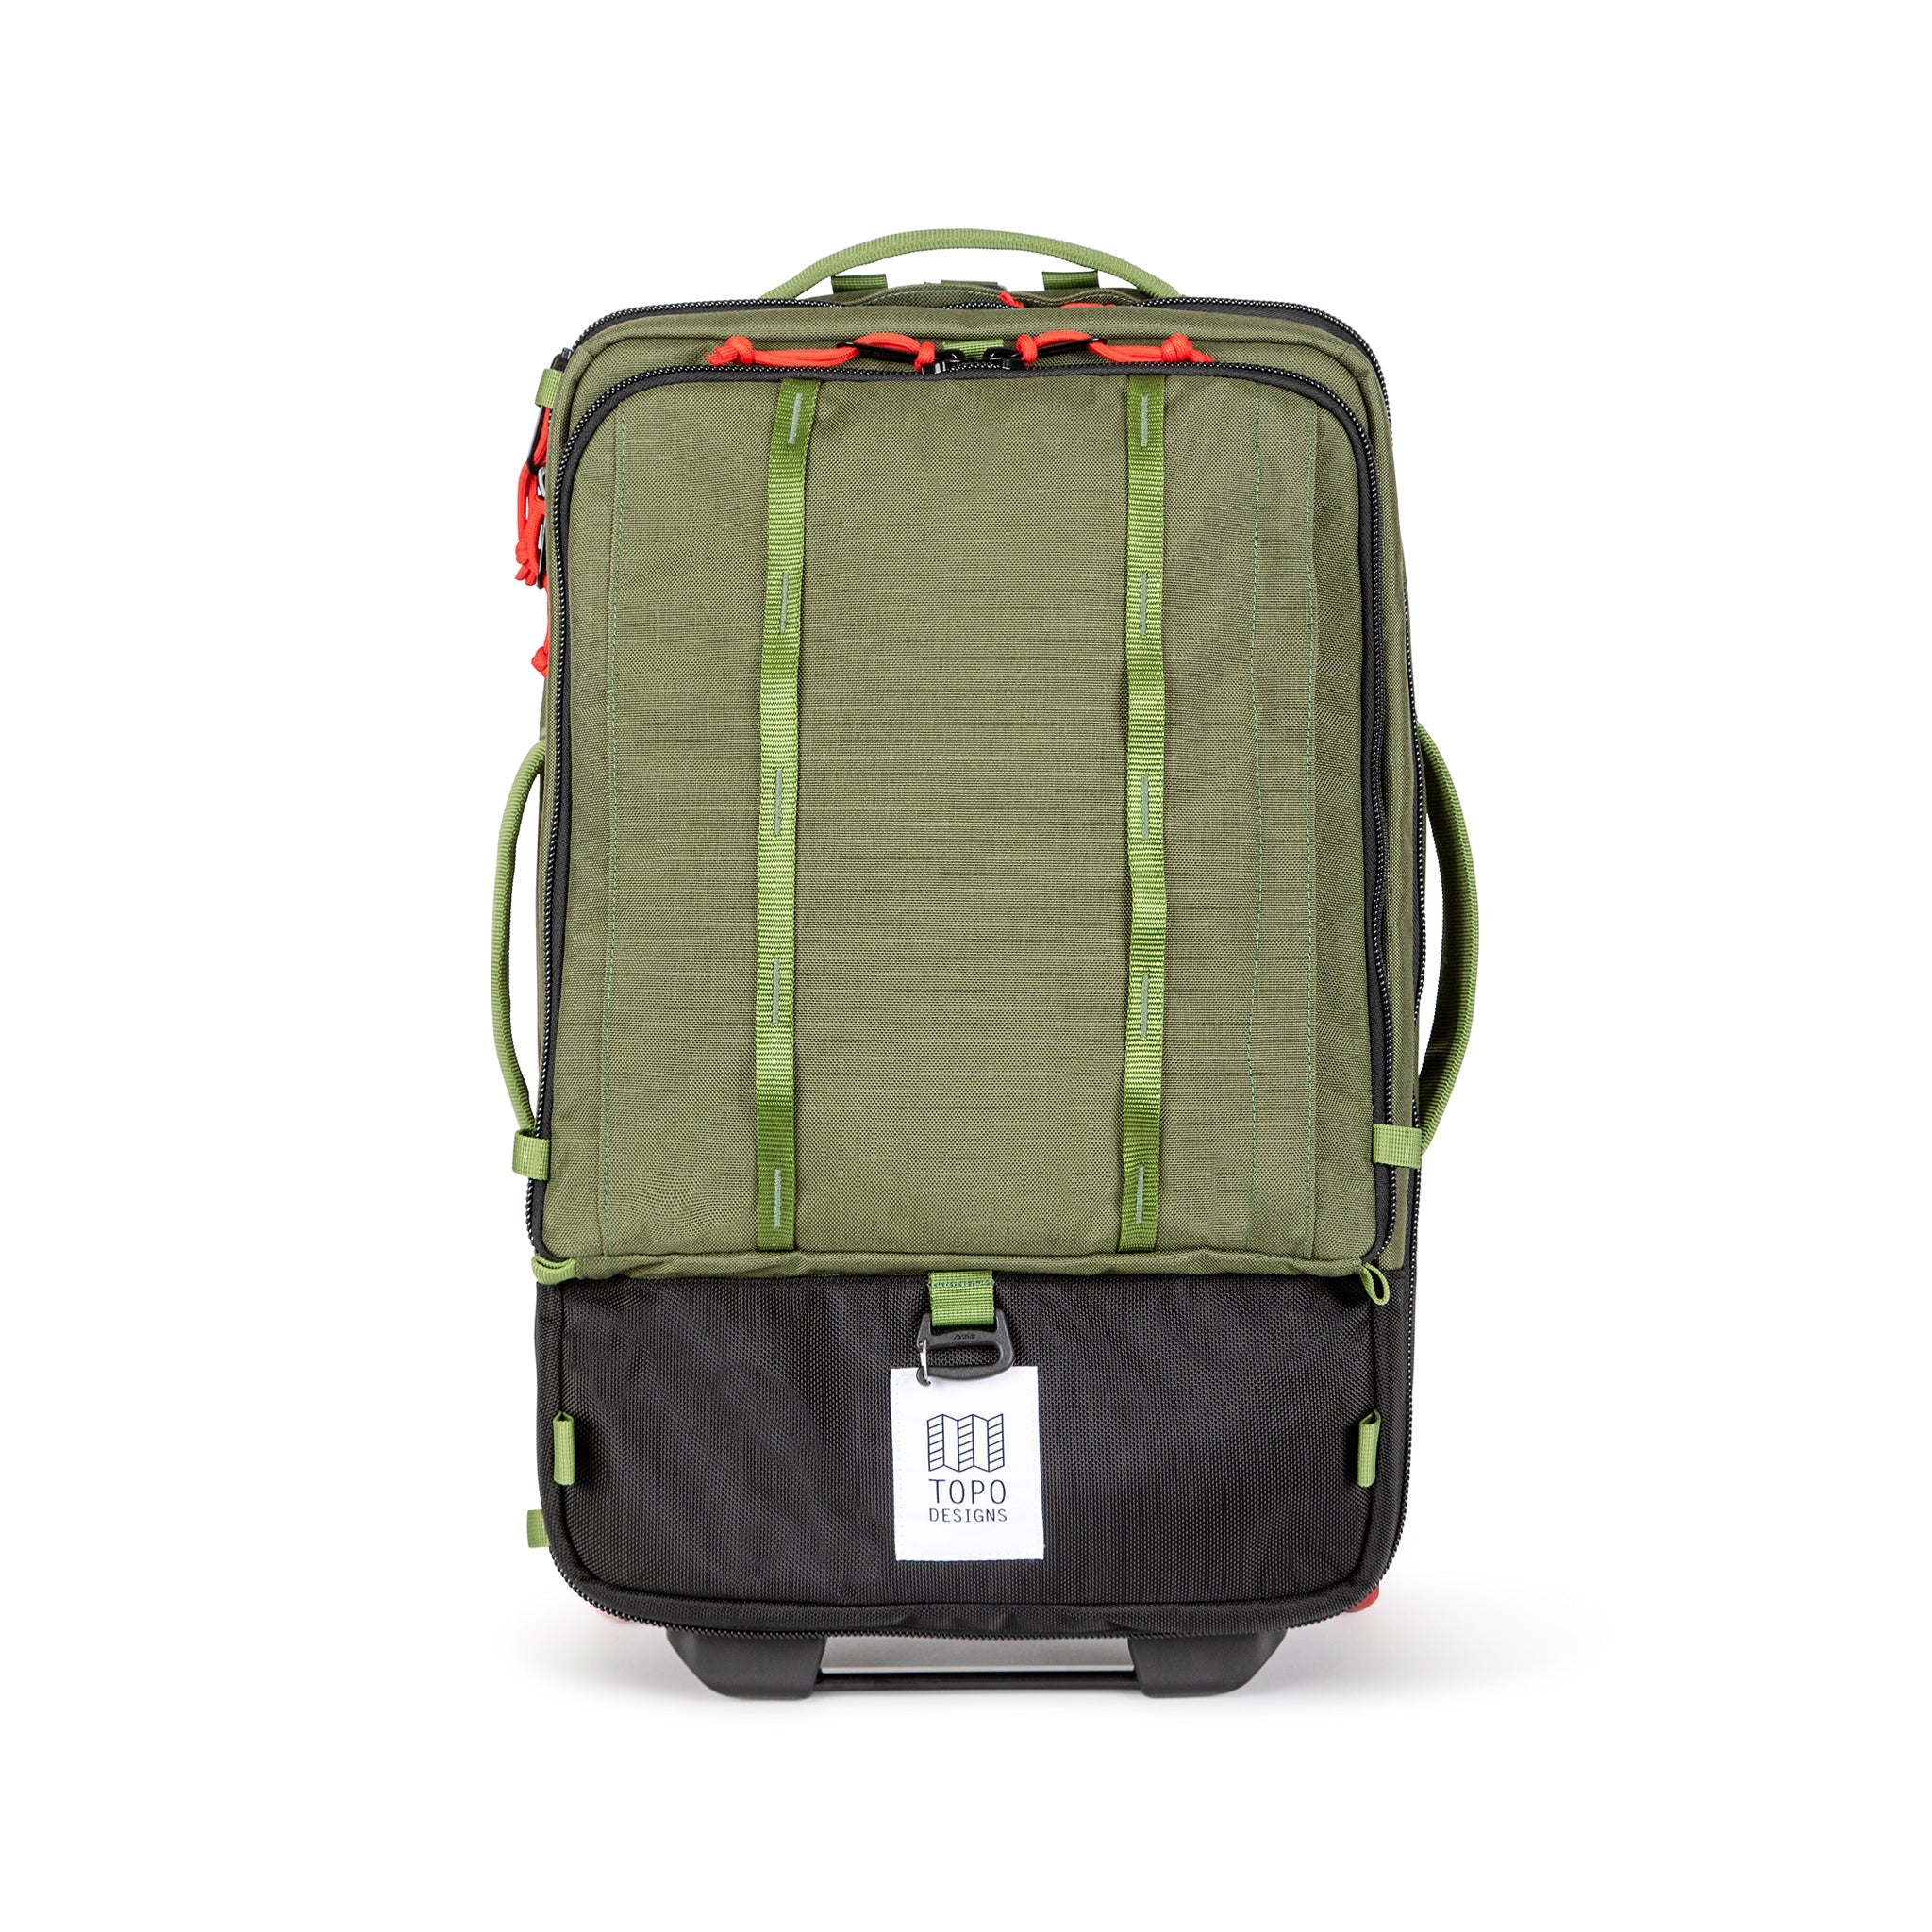 Topo Designs Global Travel Bag Roller durable carry-on convertible laptop backpack rolling suitcase in "Olive" green.